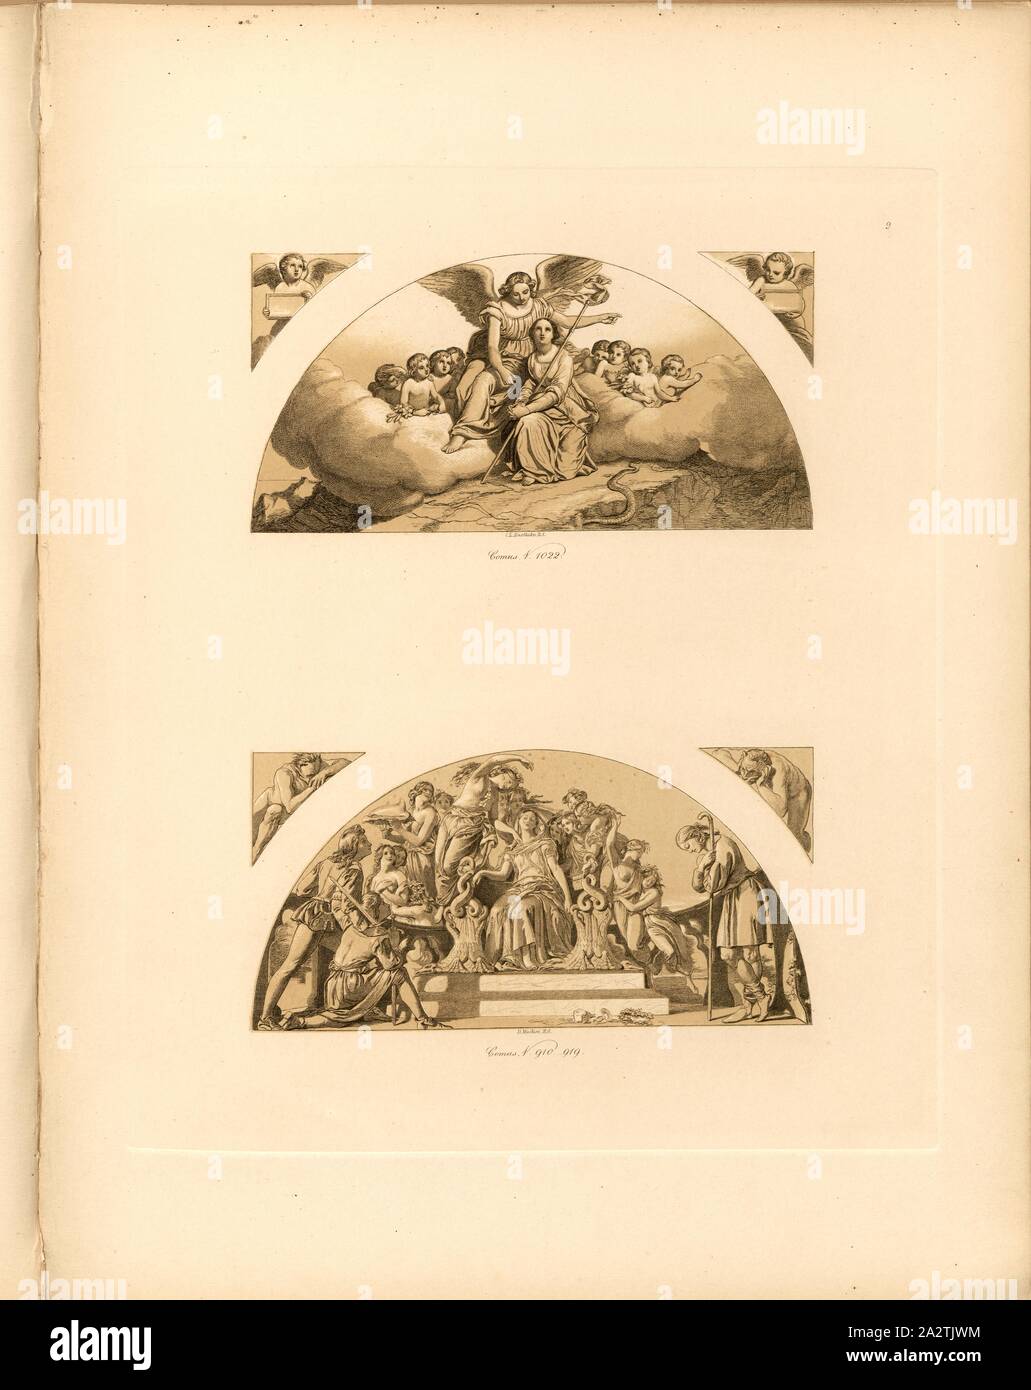 Comus, V. 1022, Comus 910-919, Murals with scenes from the poem 'Masque of Comus' by John Milton (Pavilion, Buckingham Palace Gardens), signed: C. L. Eastlake, RA; D. Maclise, RA, Taf. 10, 9, after p. 11, Eastlake, Charles L.; Maclise, Daniel, Ludwig Gruner; Anna Jameson: The decorations of the garden-pavilion in the grounds of Buckingham Palace. London: publ. by John Murray; Longman & Co.; P. & D. Colnaghi; F. G. Moon; and L. Gruner, MDCCCXLVI Stock Photo